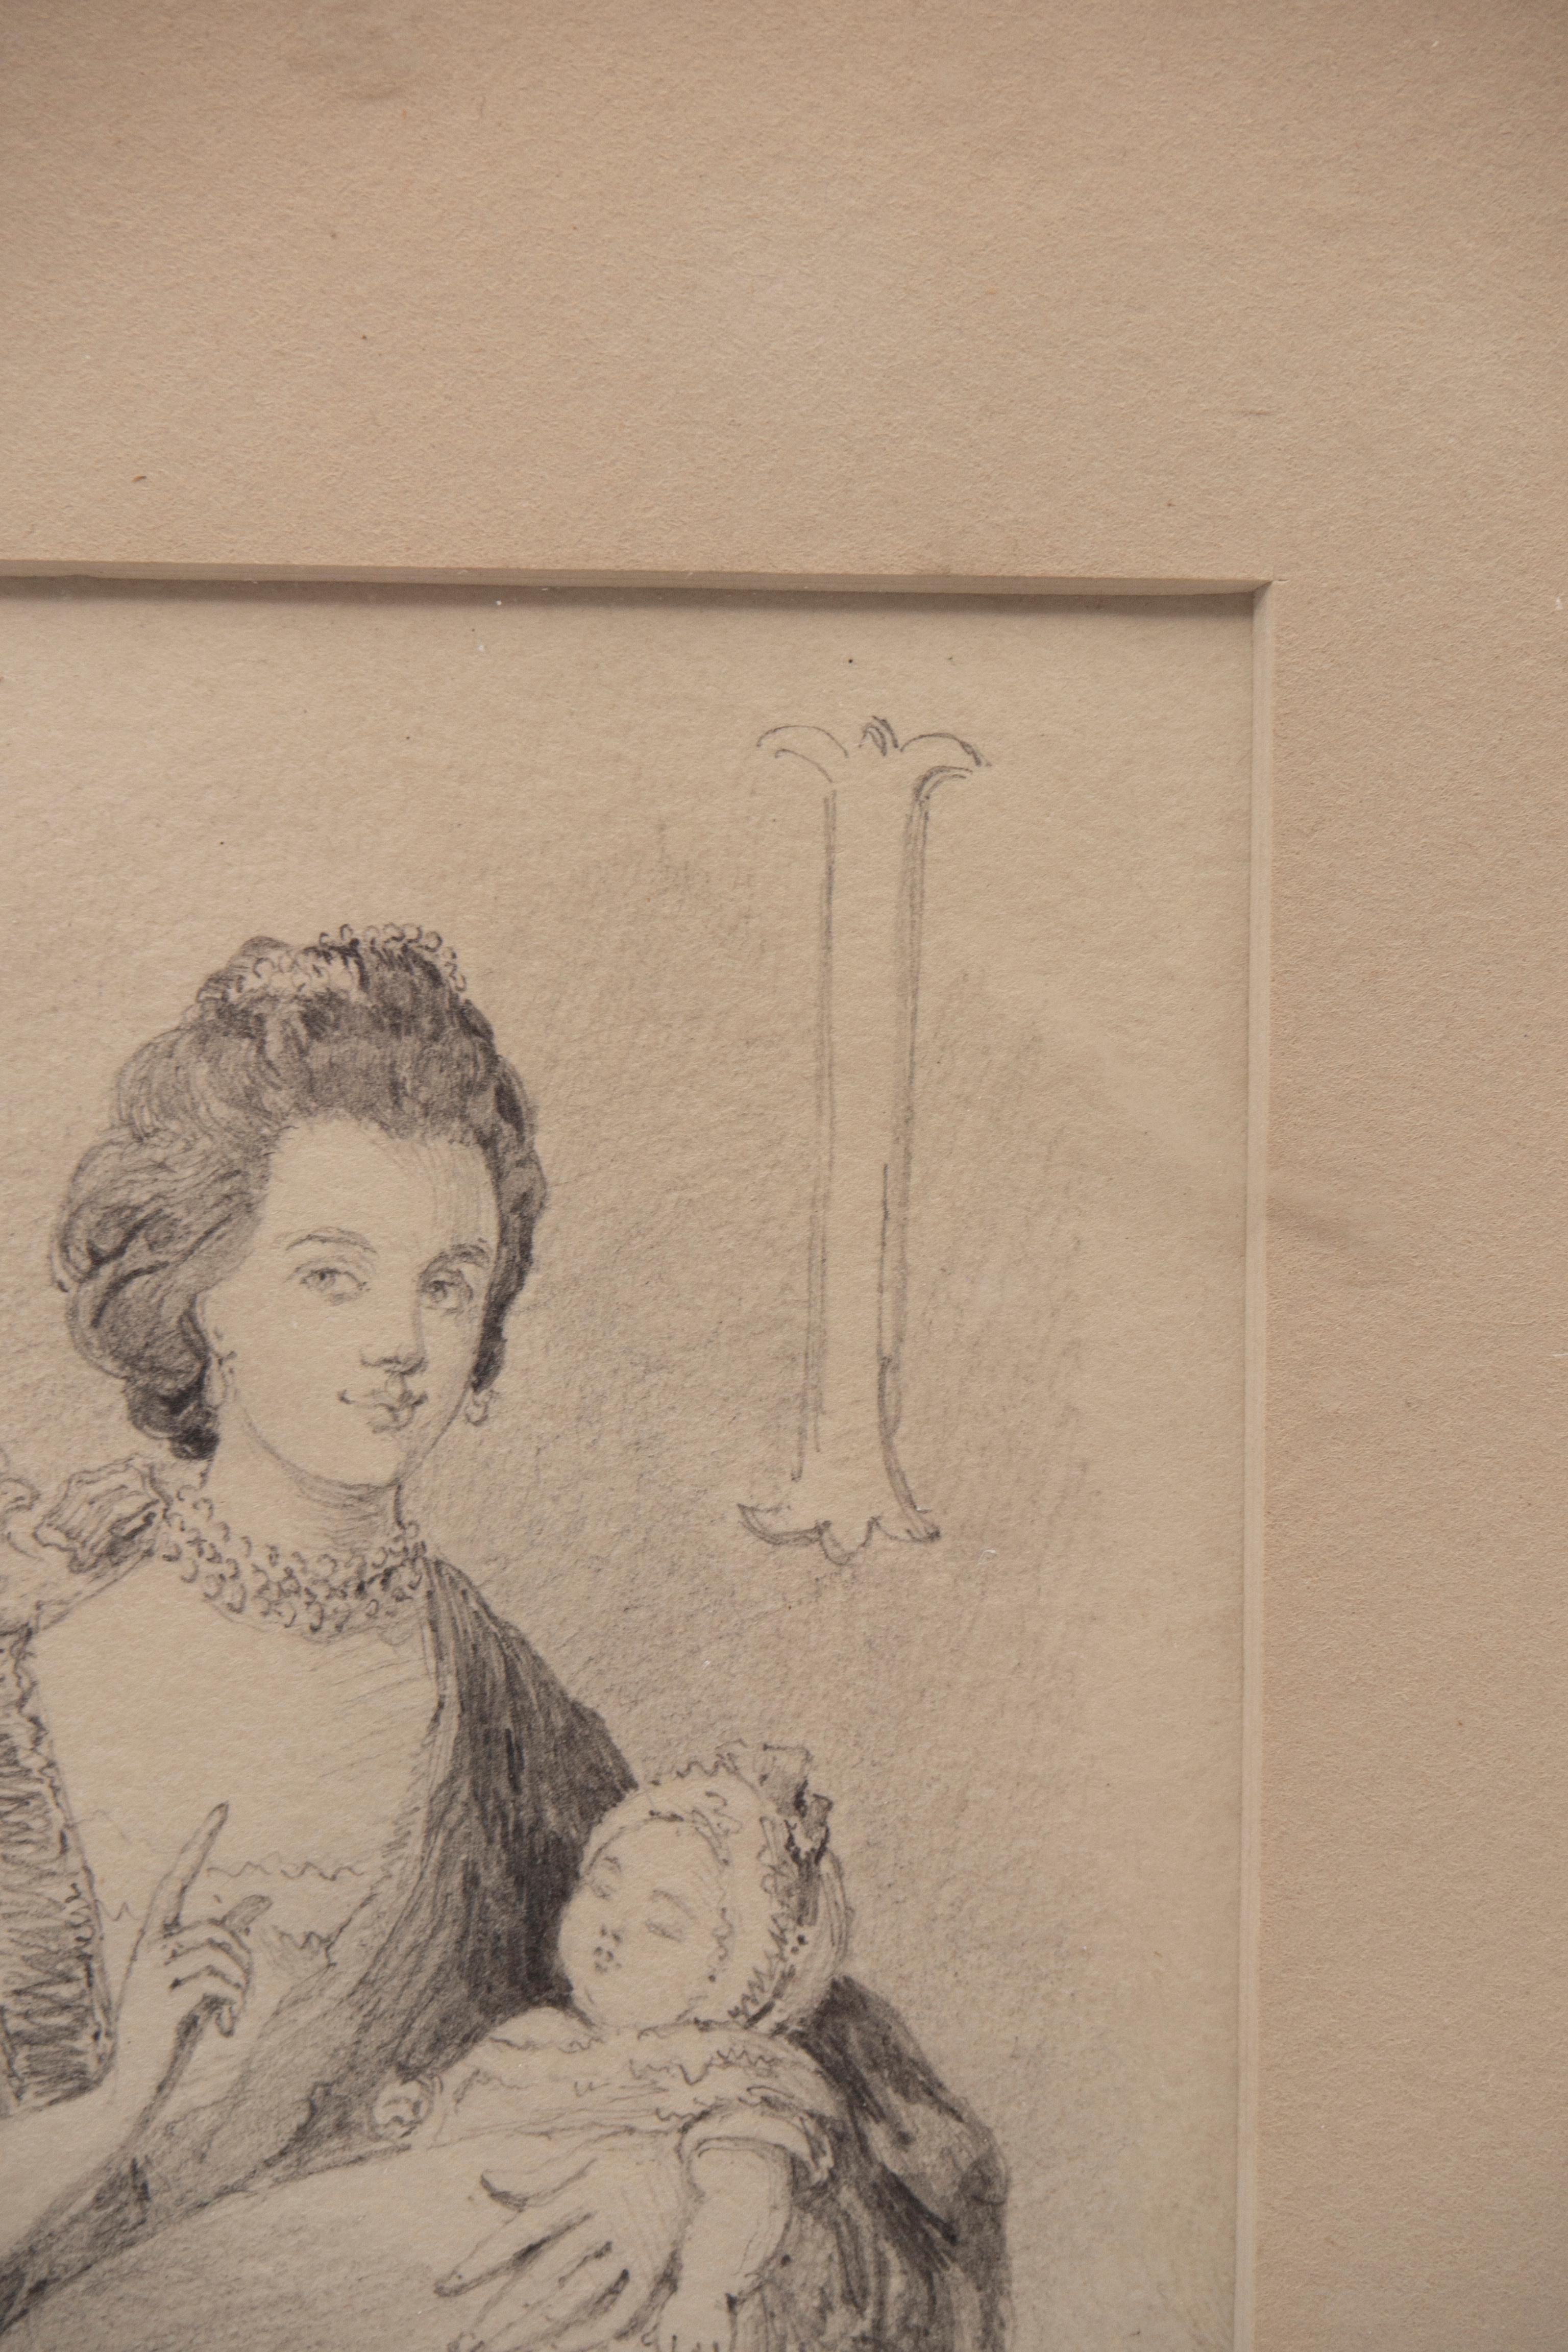 Glass Pencil Drawing Of George IV By William M. Thackeray From The Hearst Collection